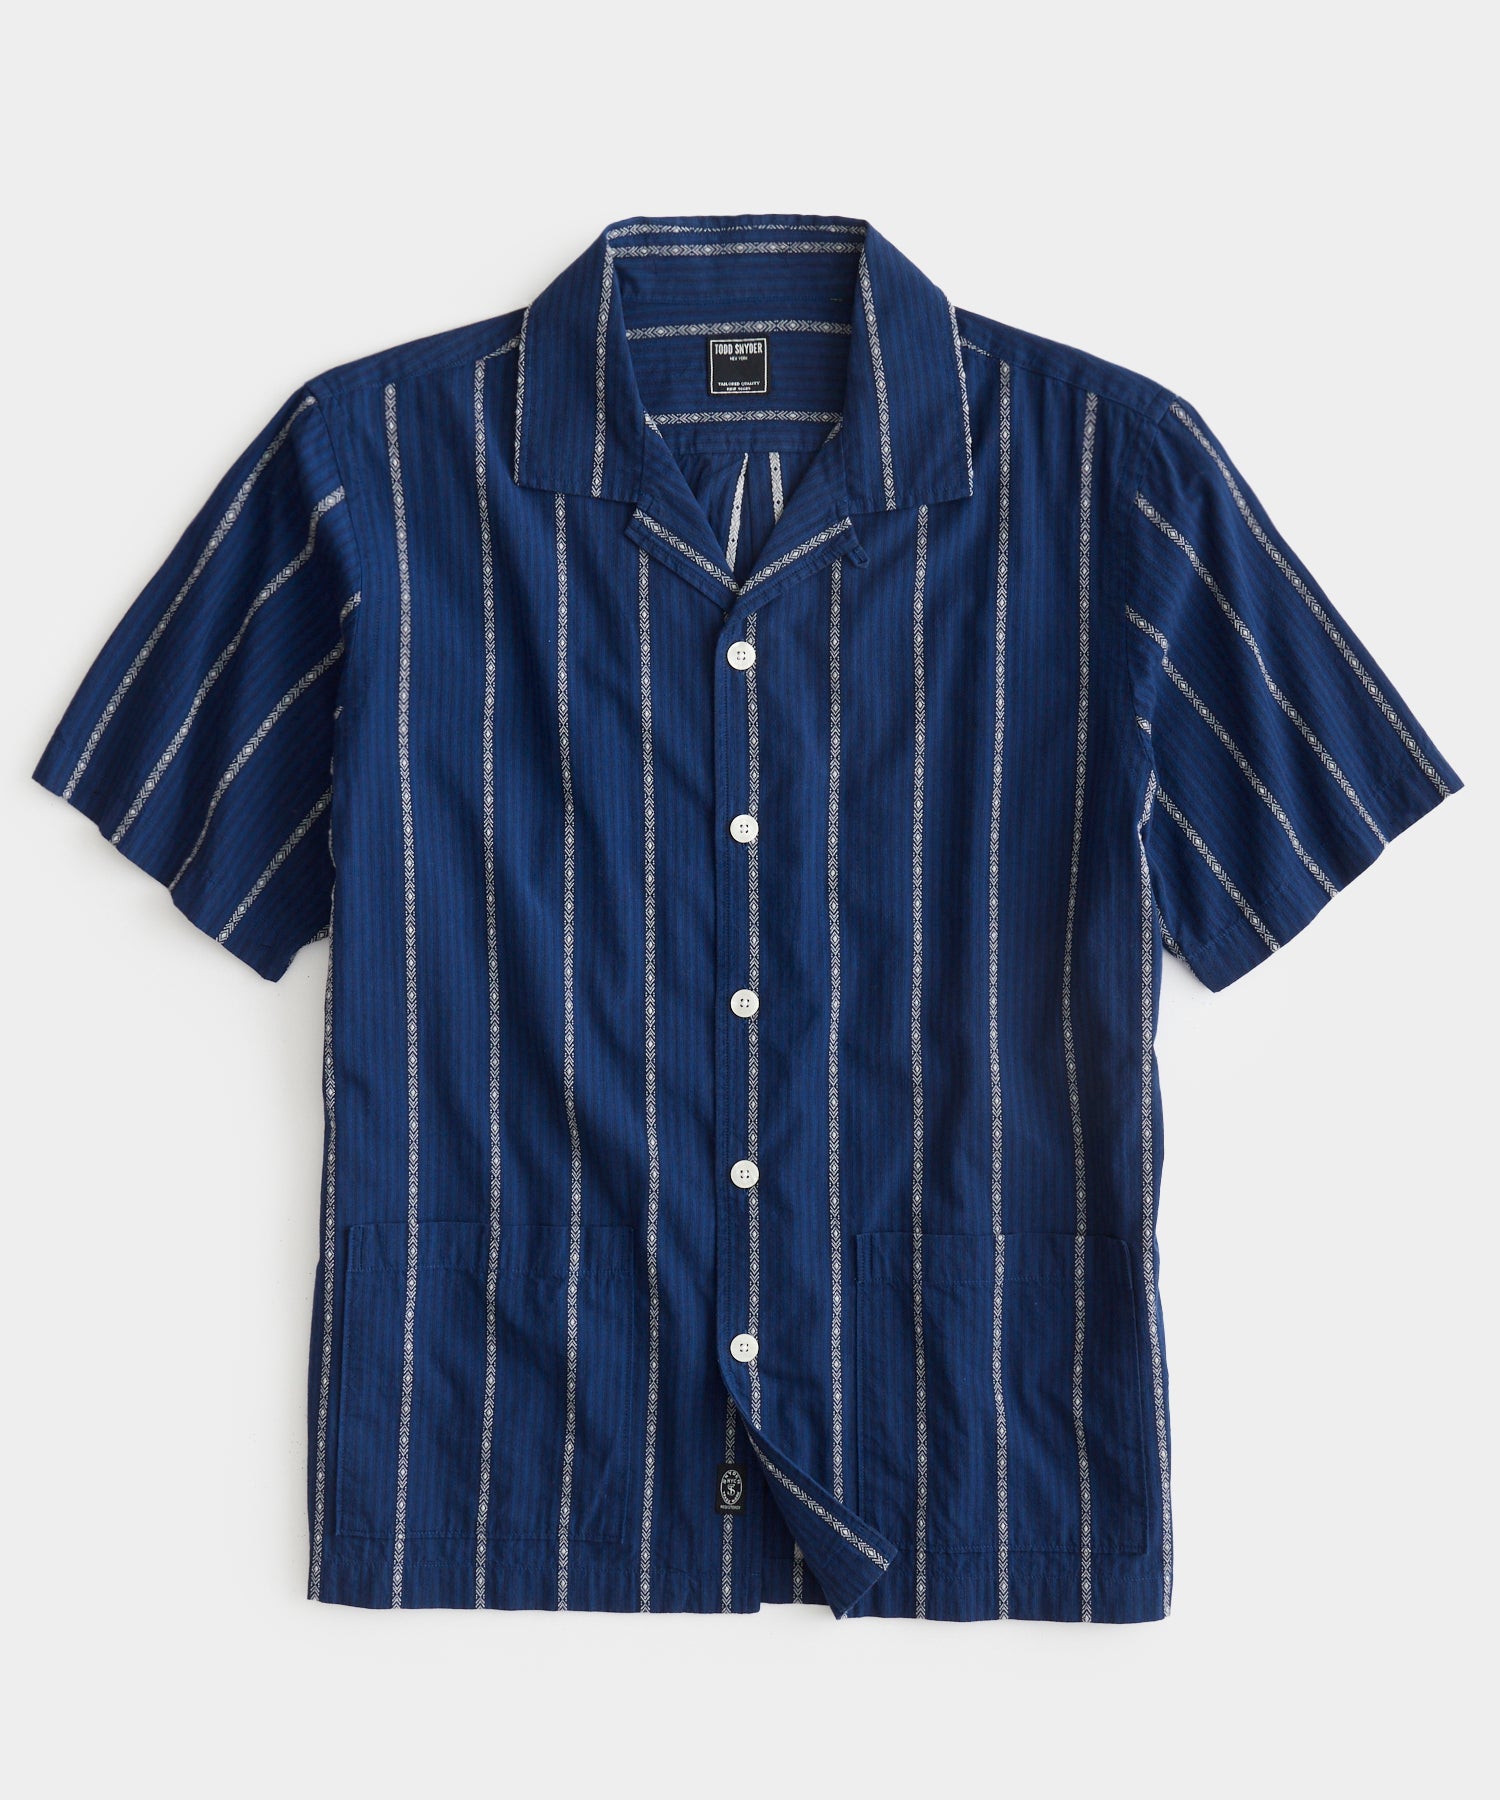 Todd Snyder - TODD SNYDER SHORT SLEEVE LEISURE SHIRT IN BLUE STRIPE - Rent With Thred